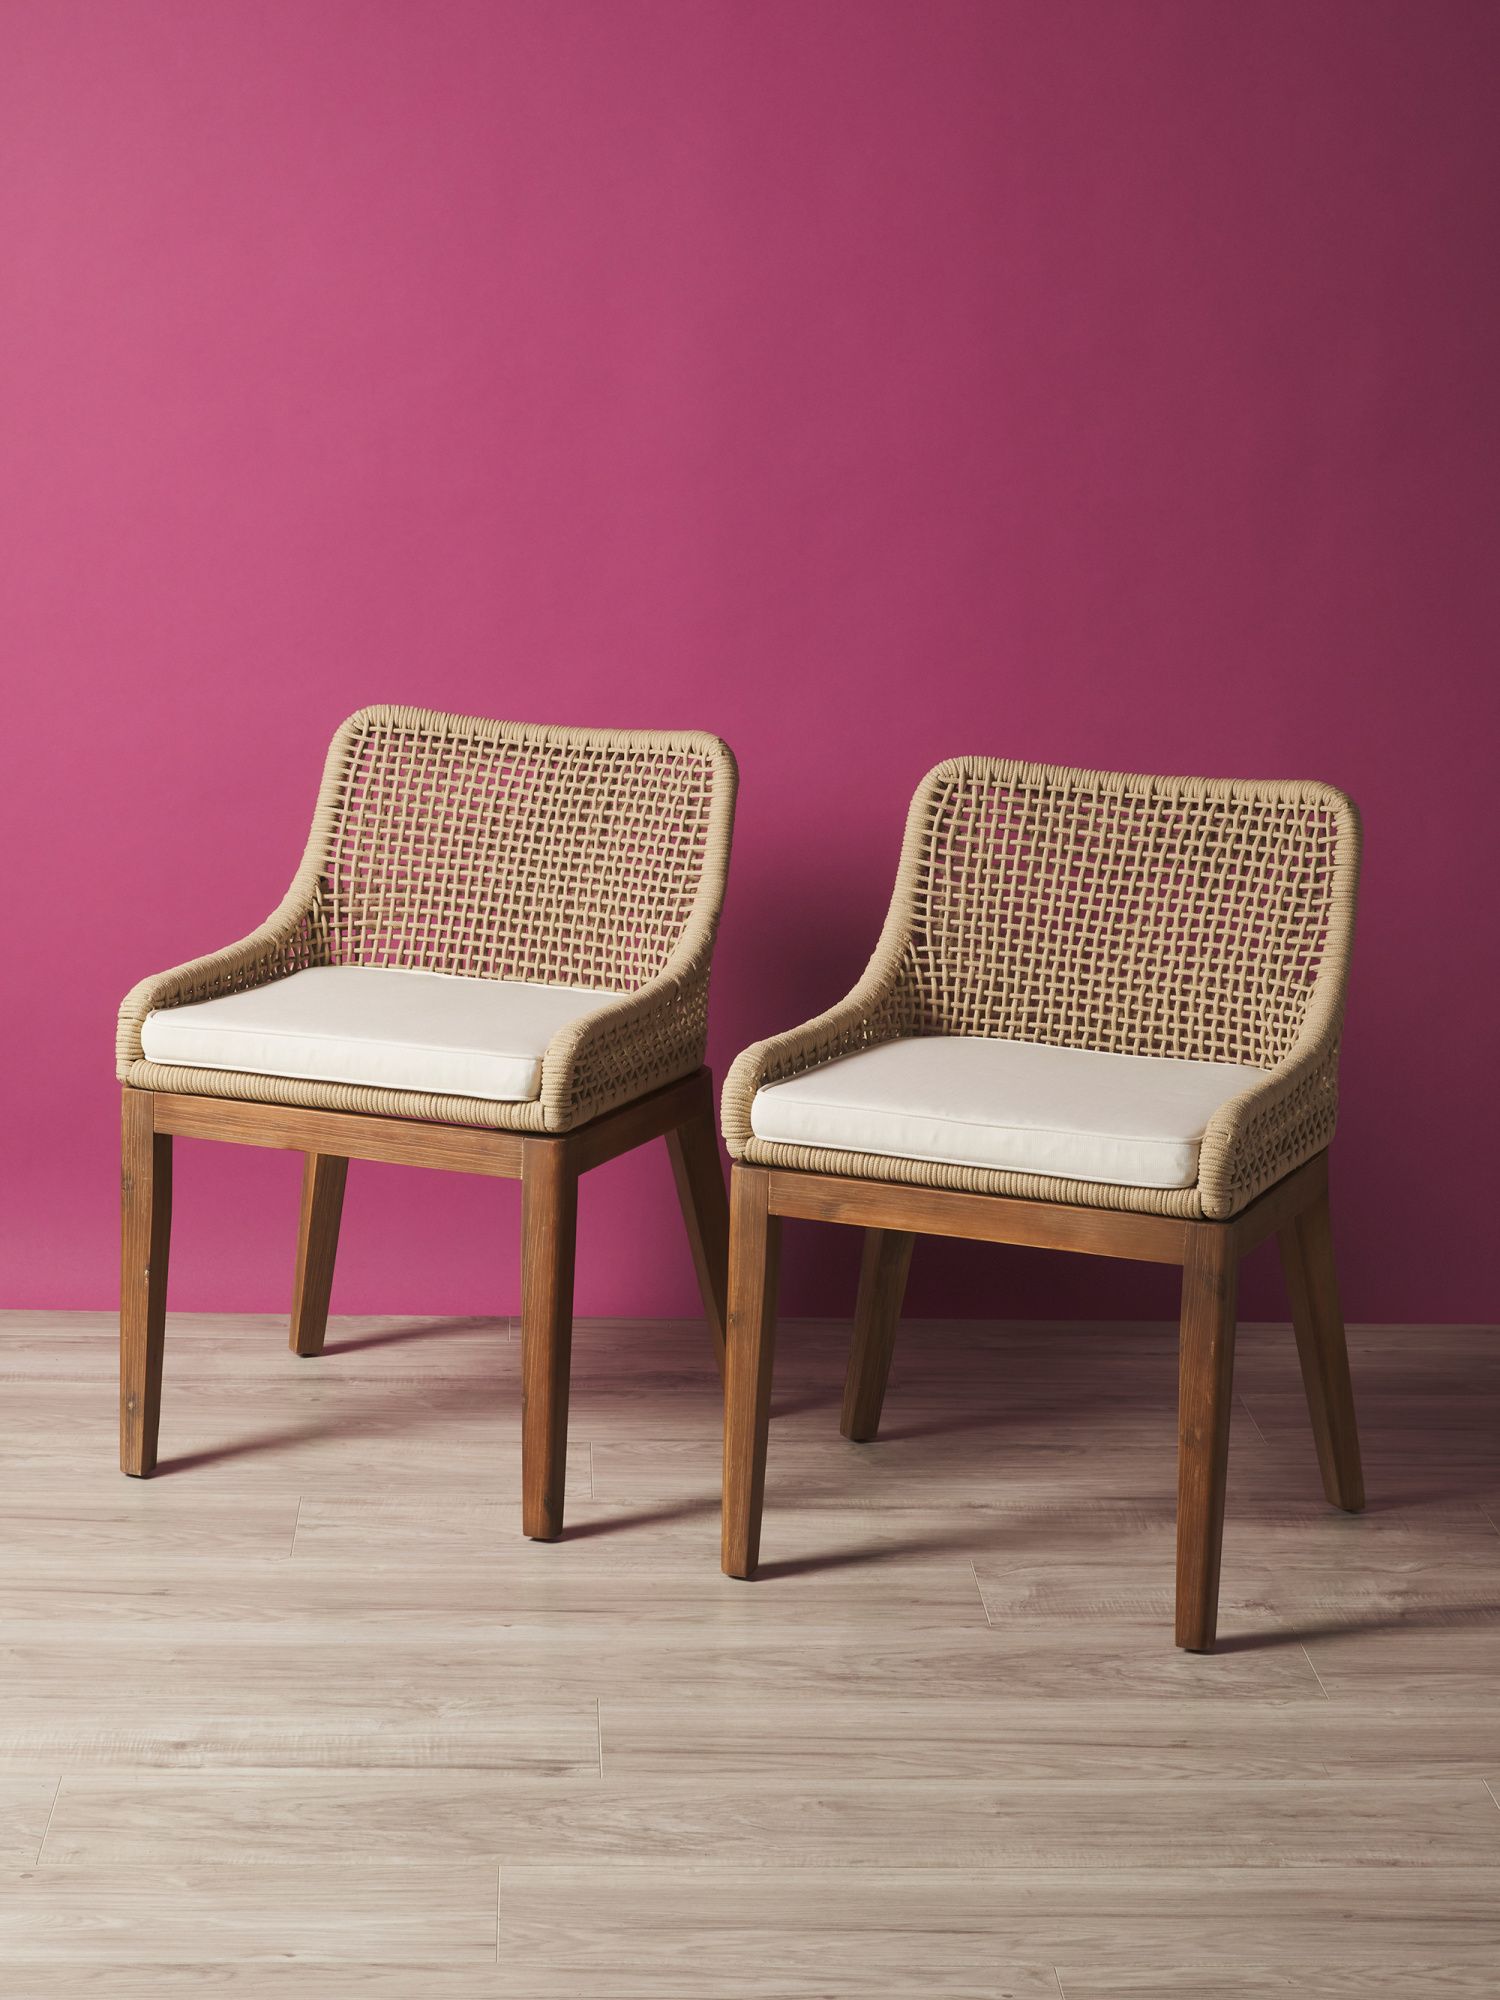 2pk Woven Rope Dining Chairs | Spring Trends | HomeGoods | HomeGoods